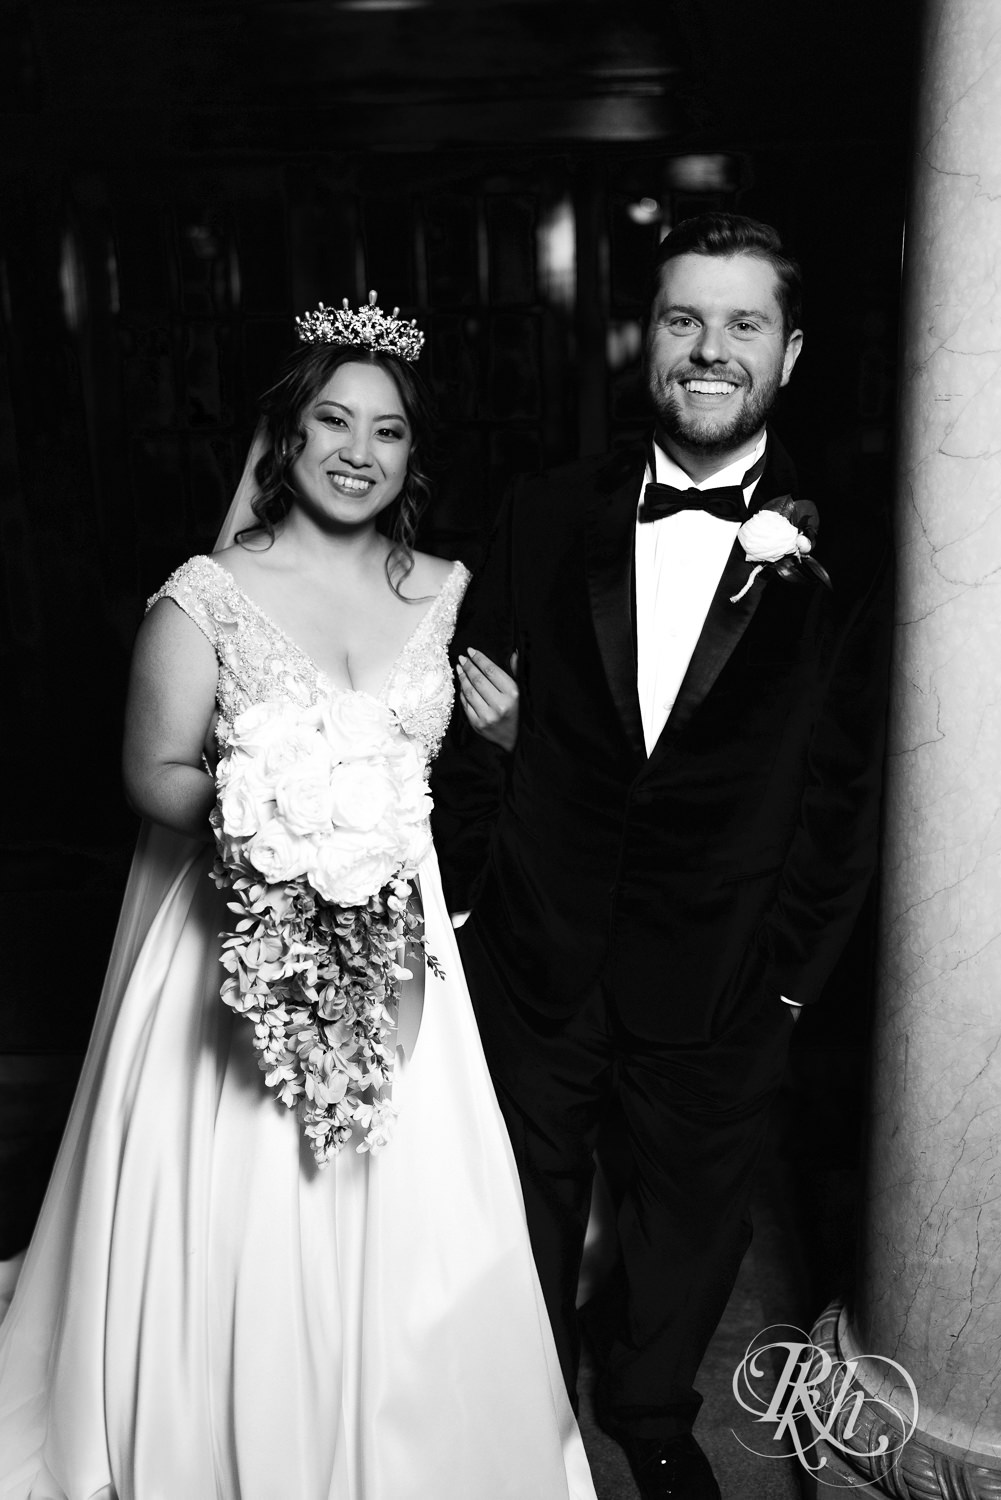 Hmong bride and groom smile on wedding day at the Saint Paul Athletic Club in Saint Paul, Minnesota.